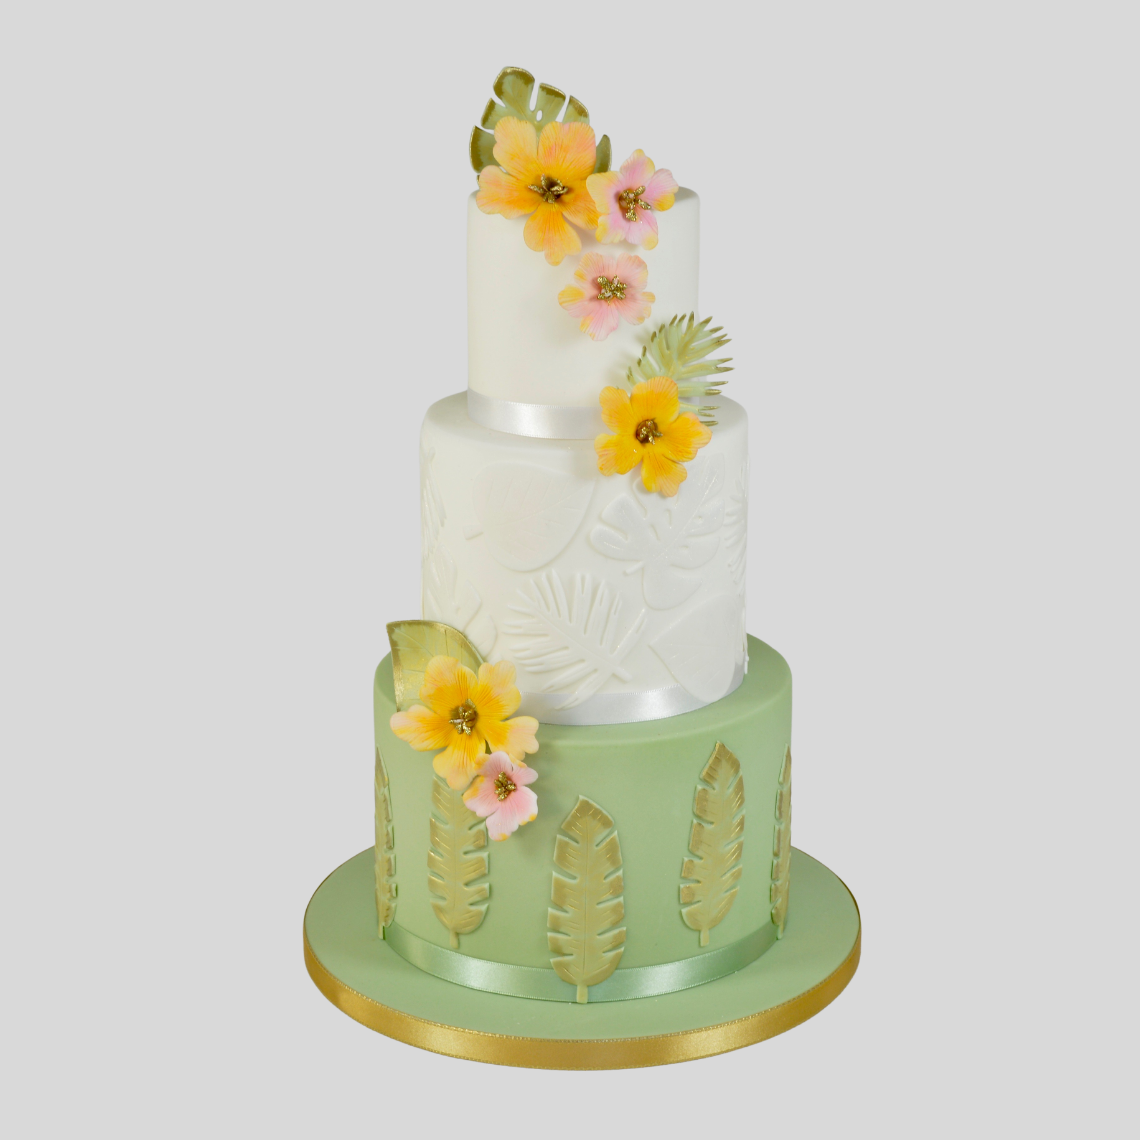 The Totally Tropical Leaves Cake Bundle